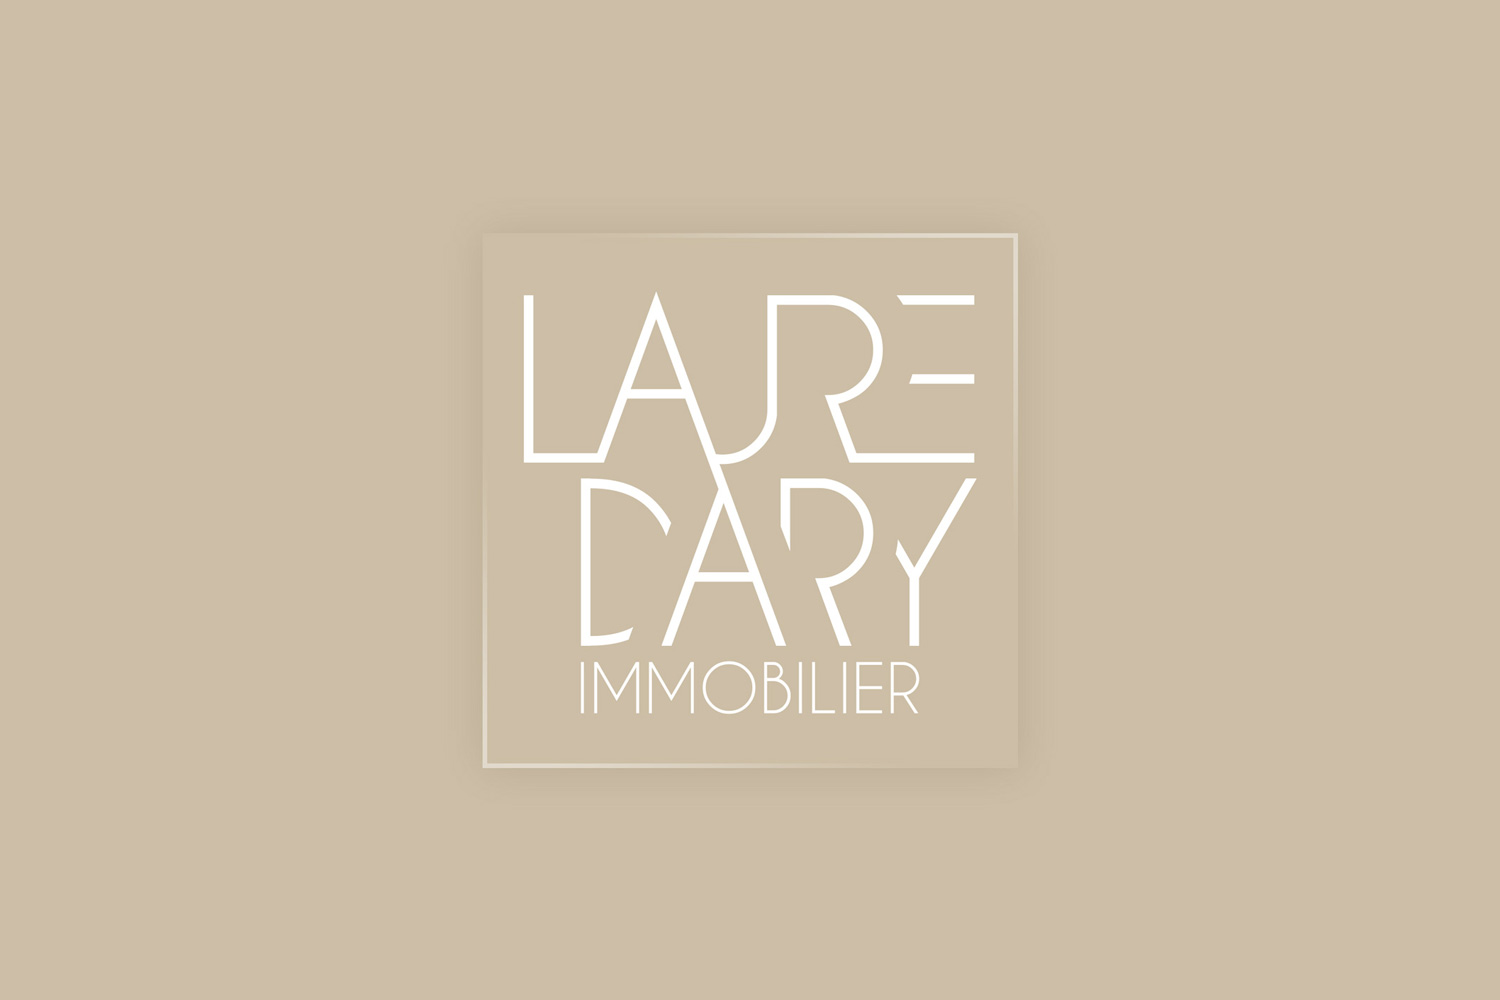 Laure Dary Immobilier